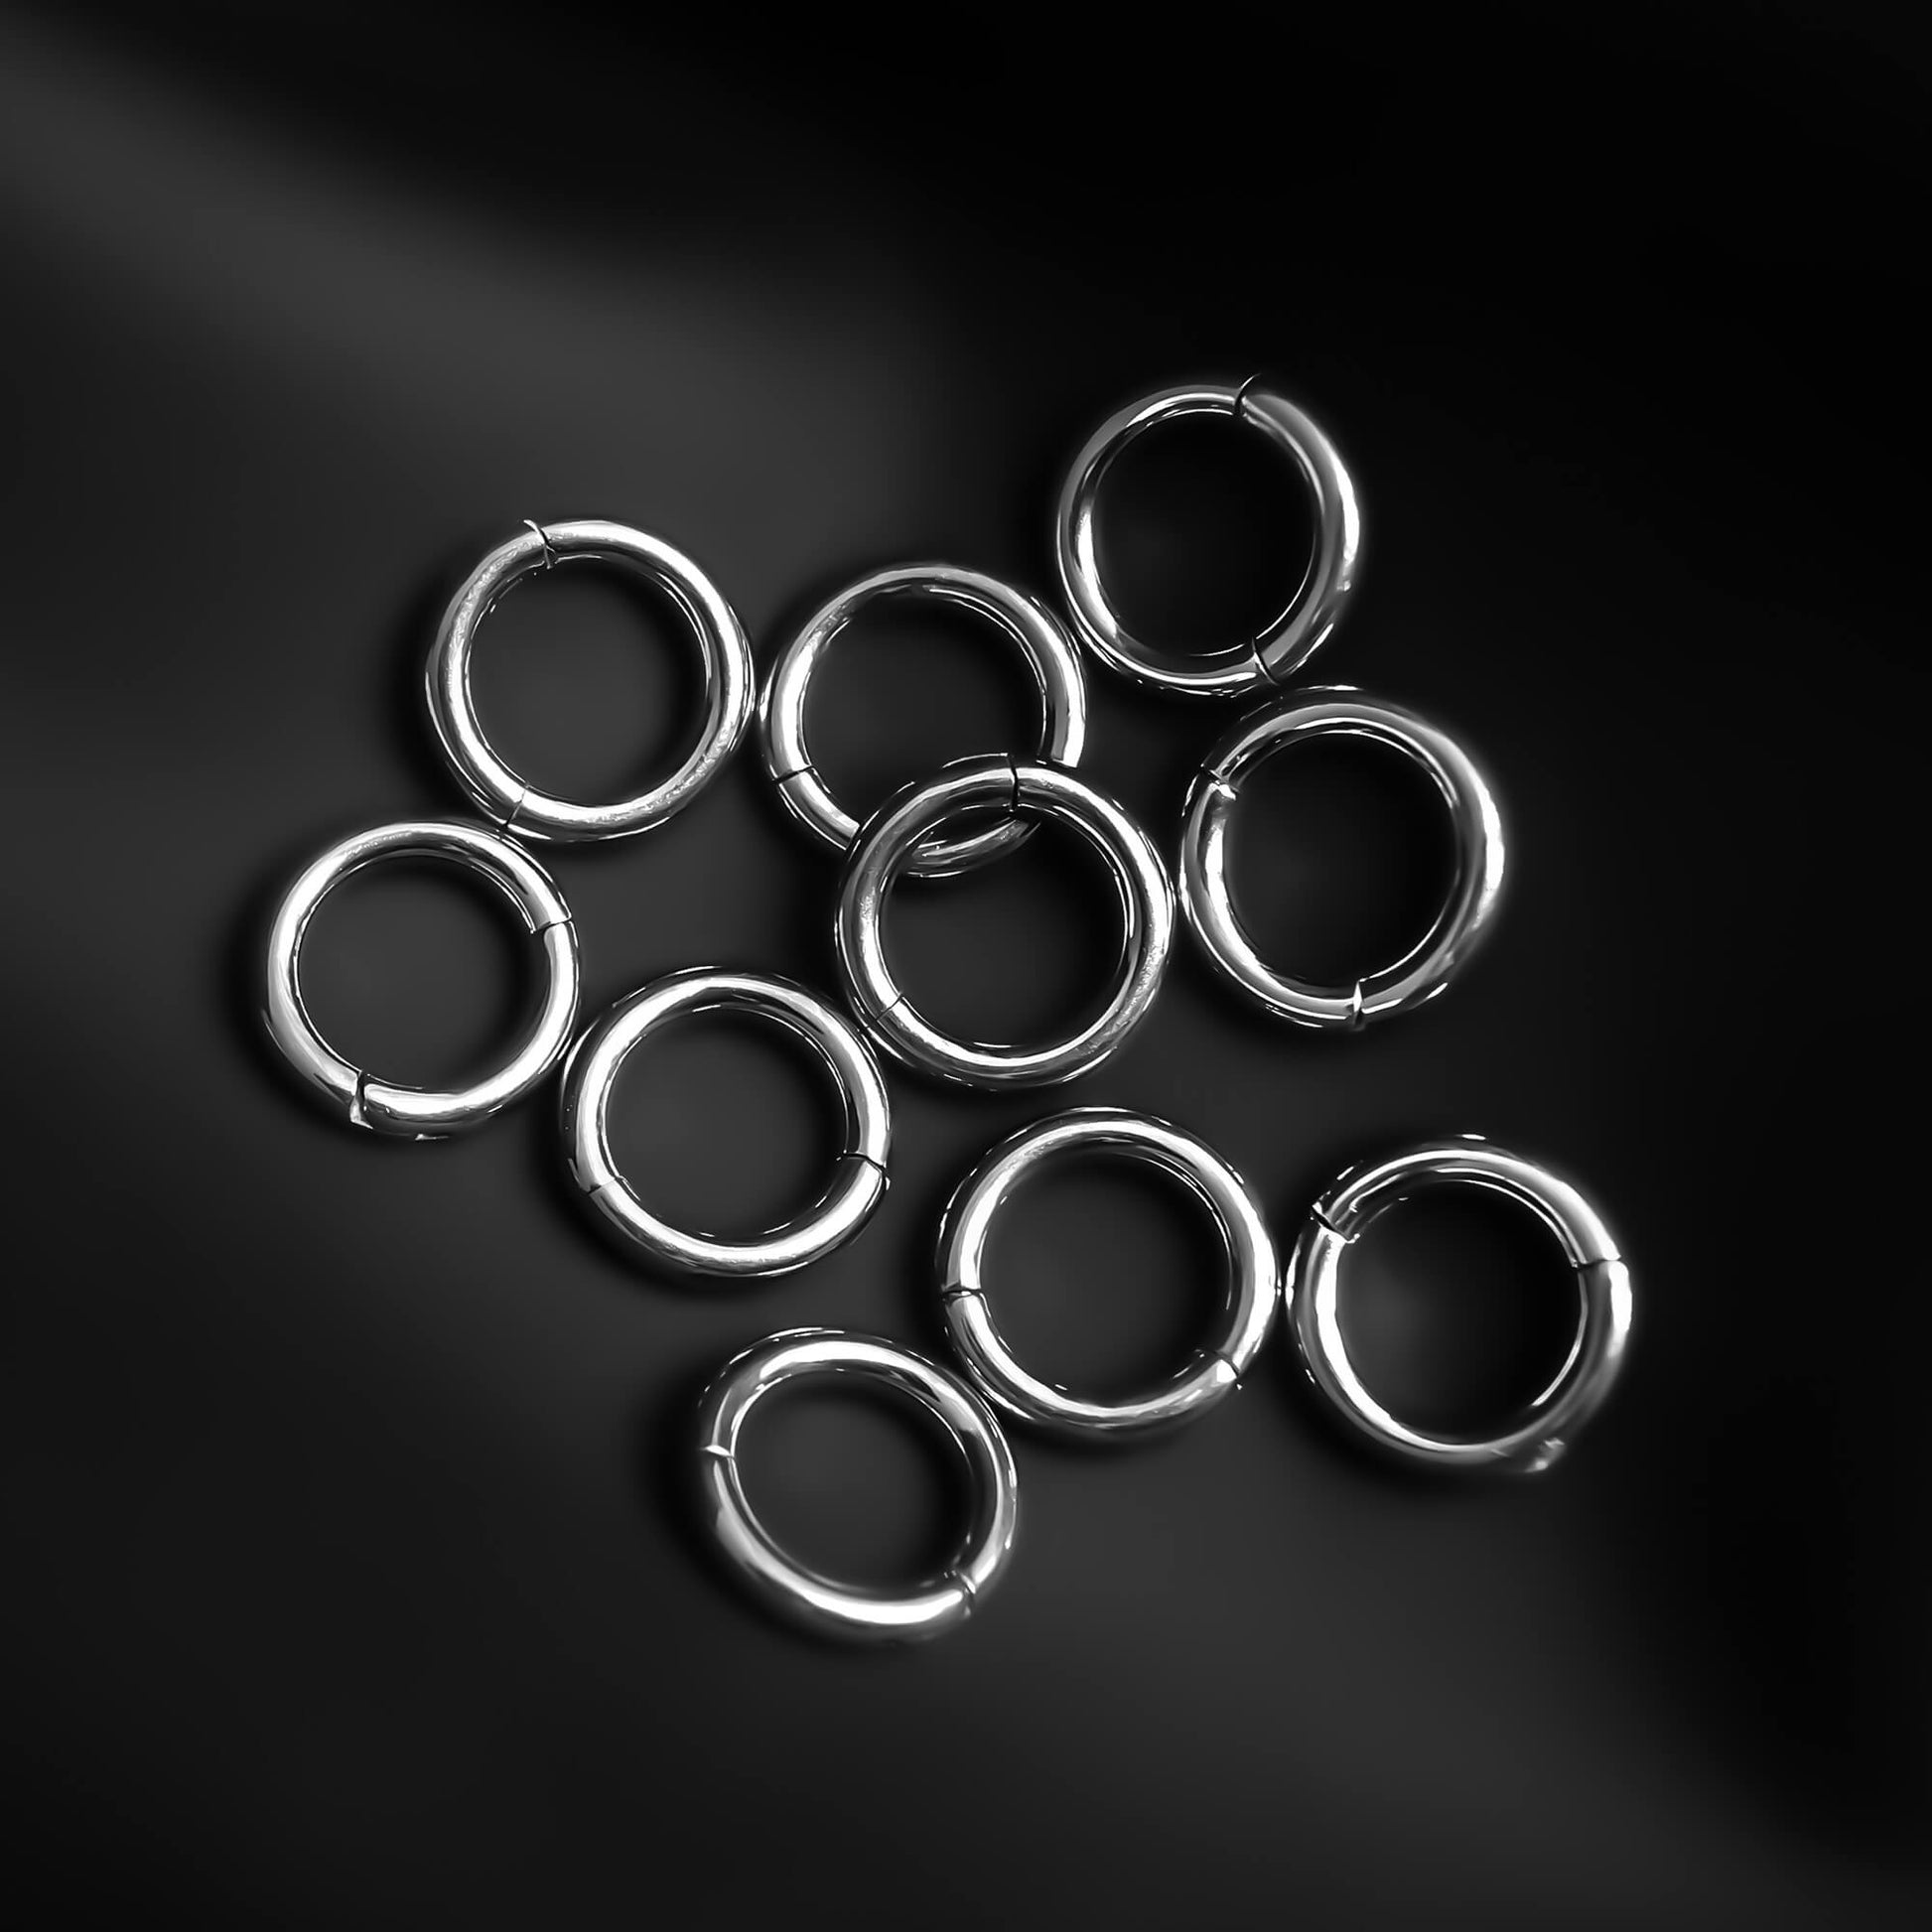 Colossal Ring Stacks in Stainless Steel in Silver - 6mm - Single Ring (No Bundle) - Stretched Ear Jewelry by Ask & Embla